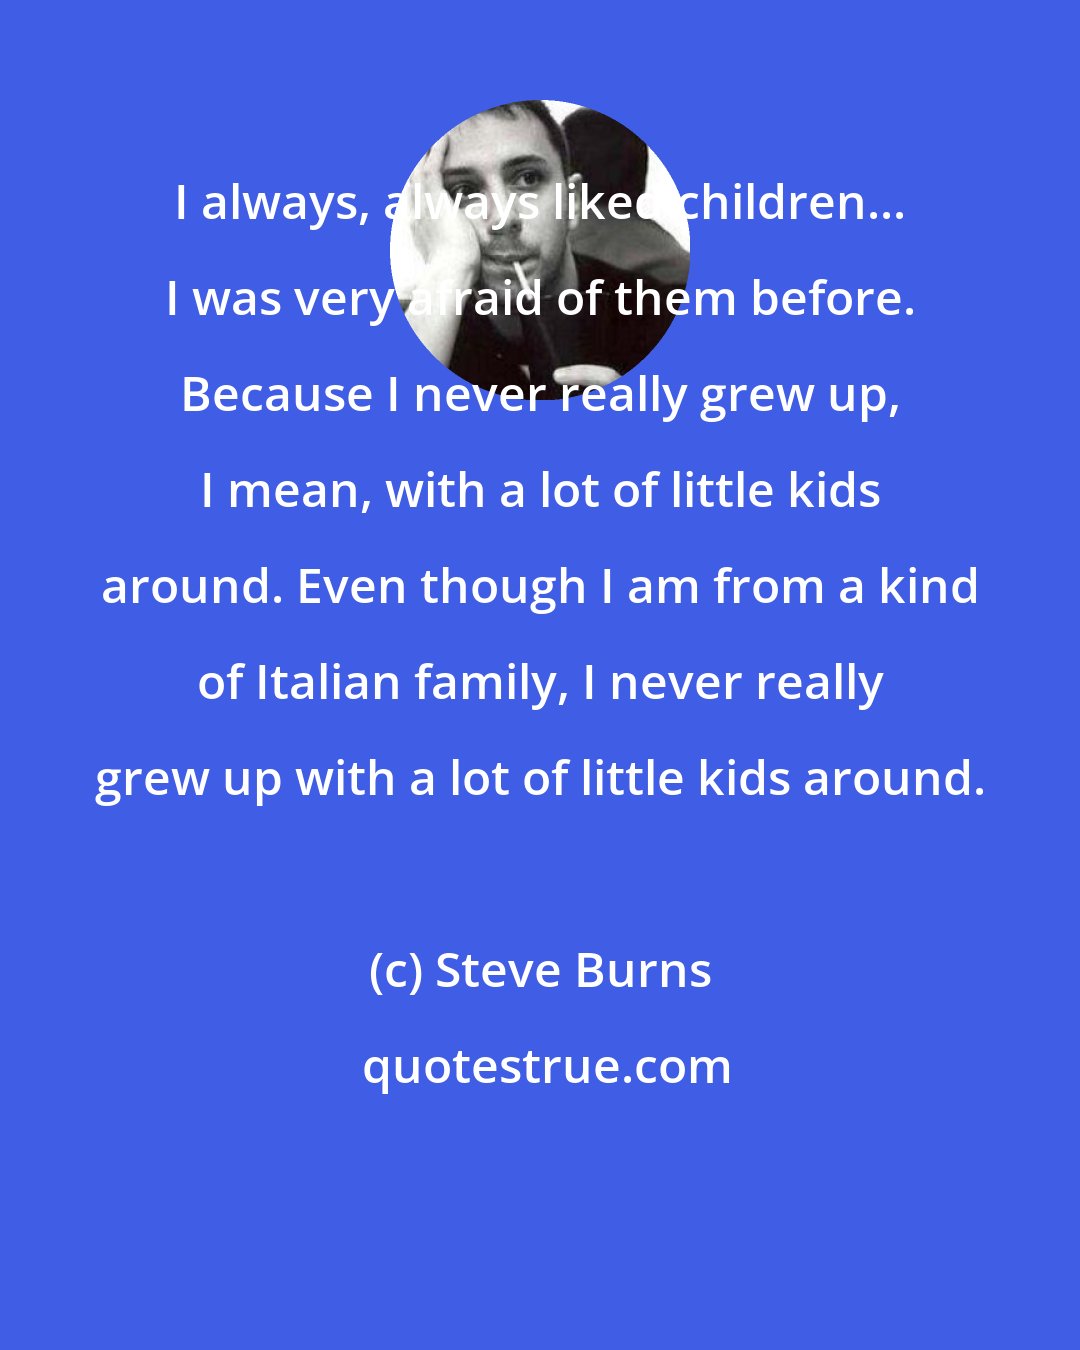 Steve Burns: I always, always liked children... I was very afraid of them before. Because I never really grew up, I mean, with a lot of little kids around. Even though I am from a kind of Italian family, I never really grew up with a lot of little kids around.